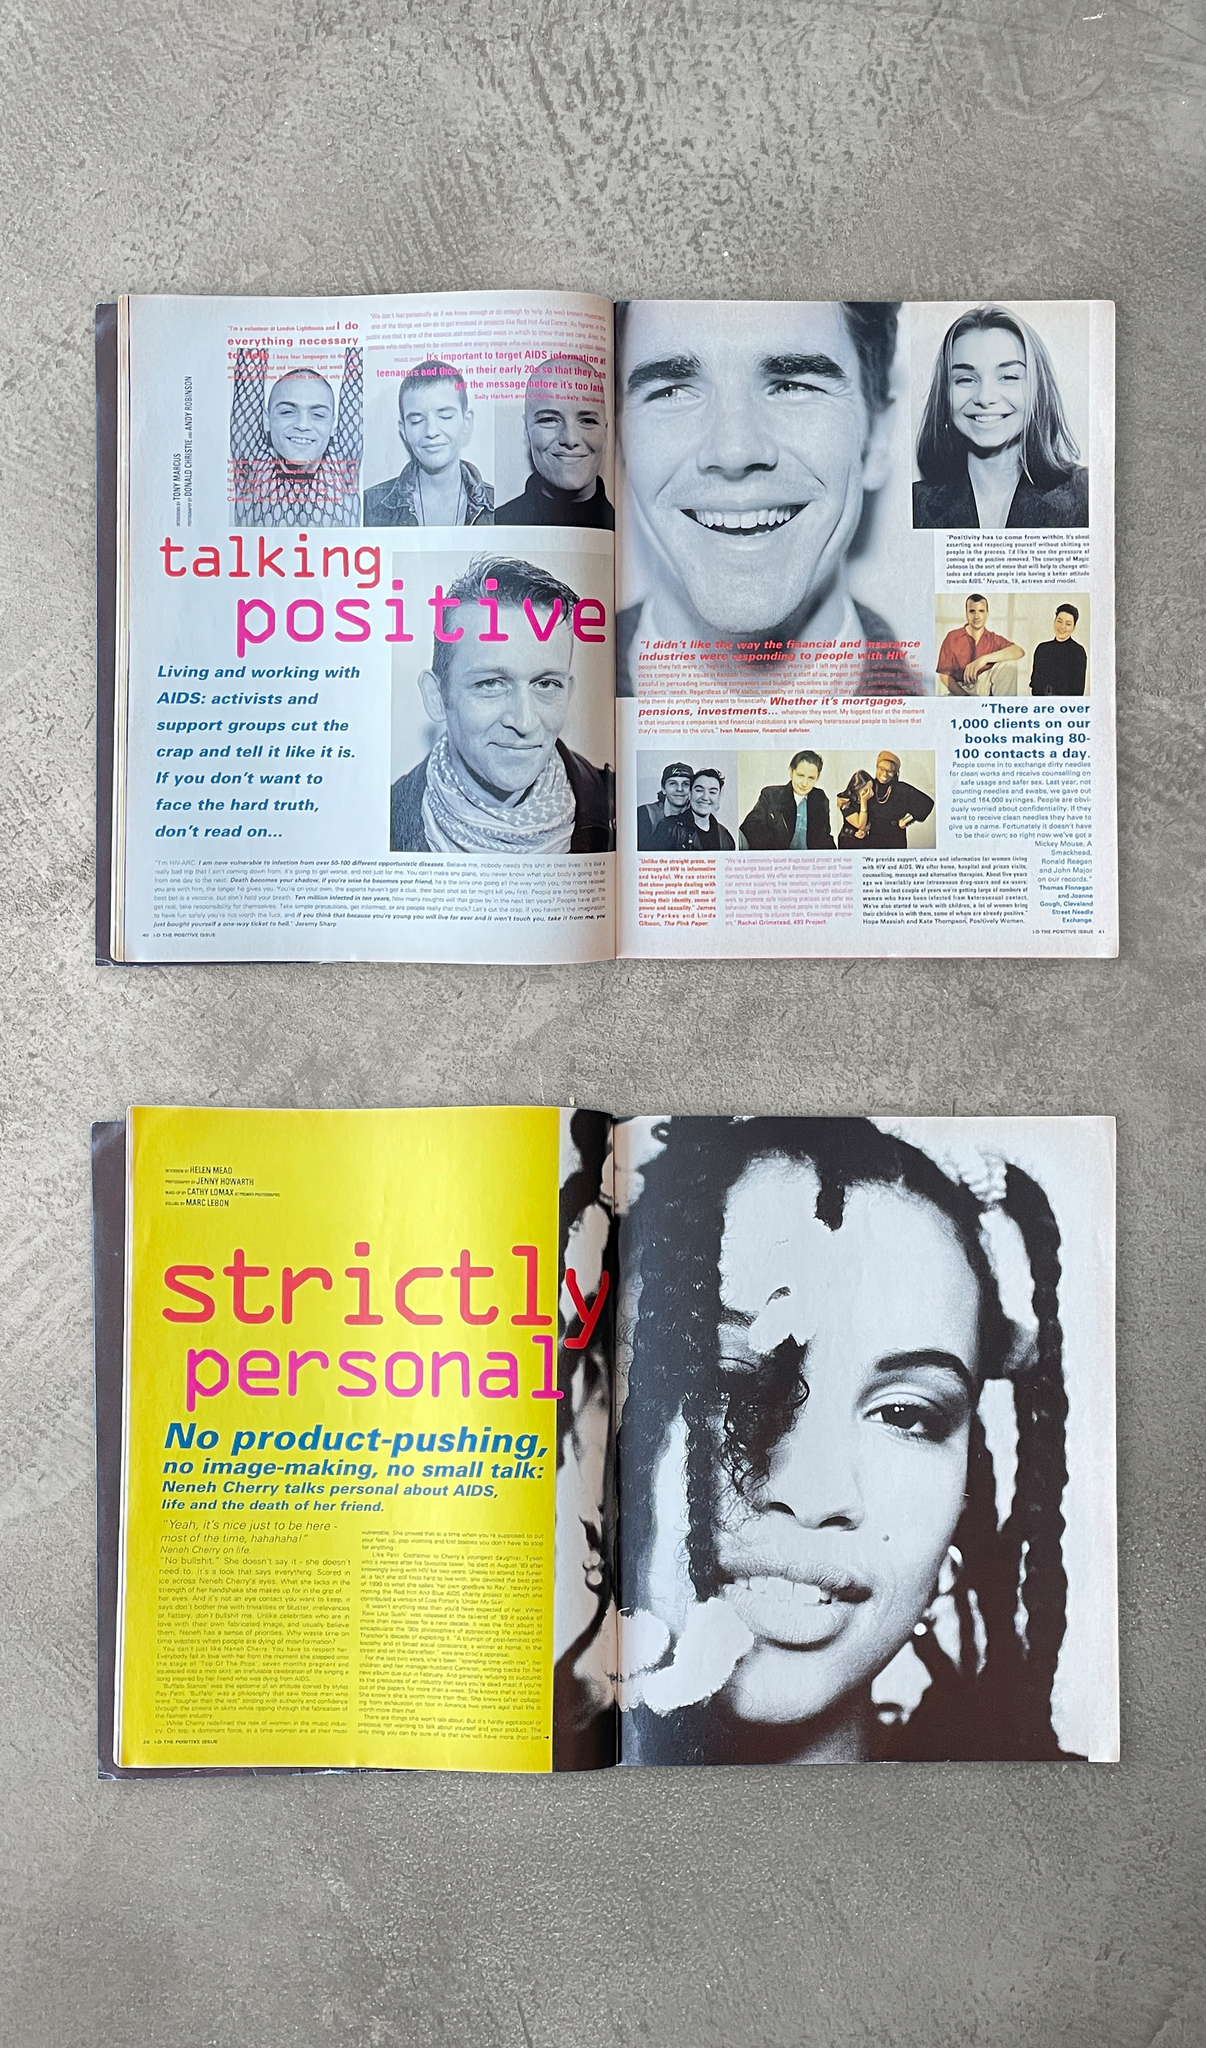 ISSUE 100 - THE POSITIVE ISSUE